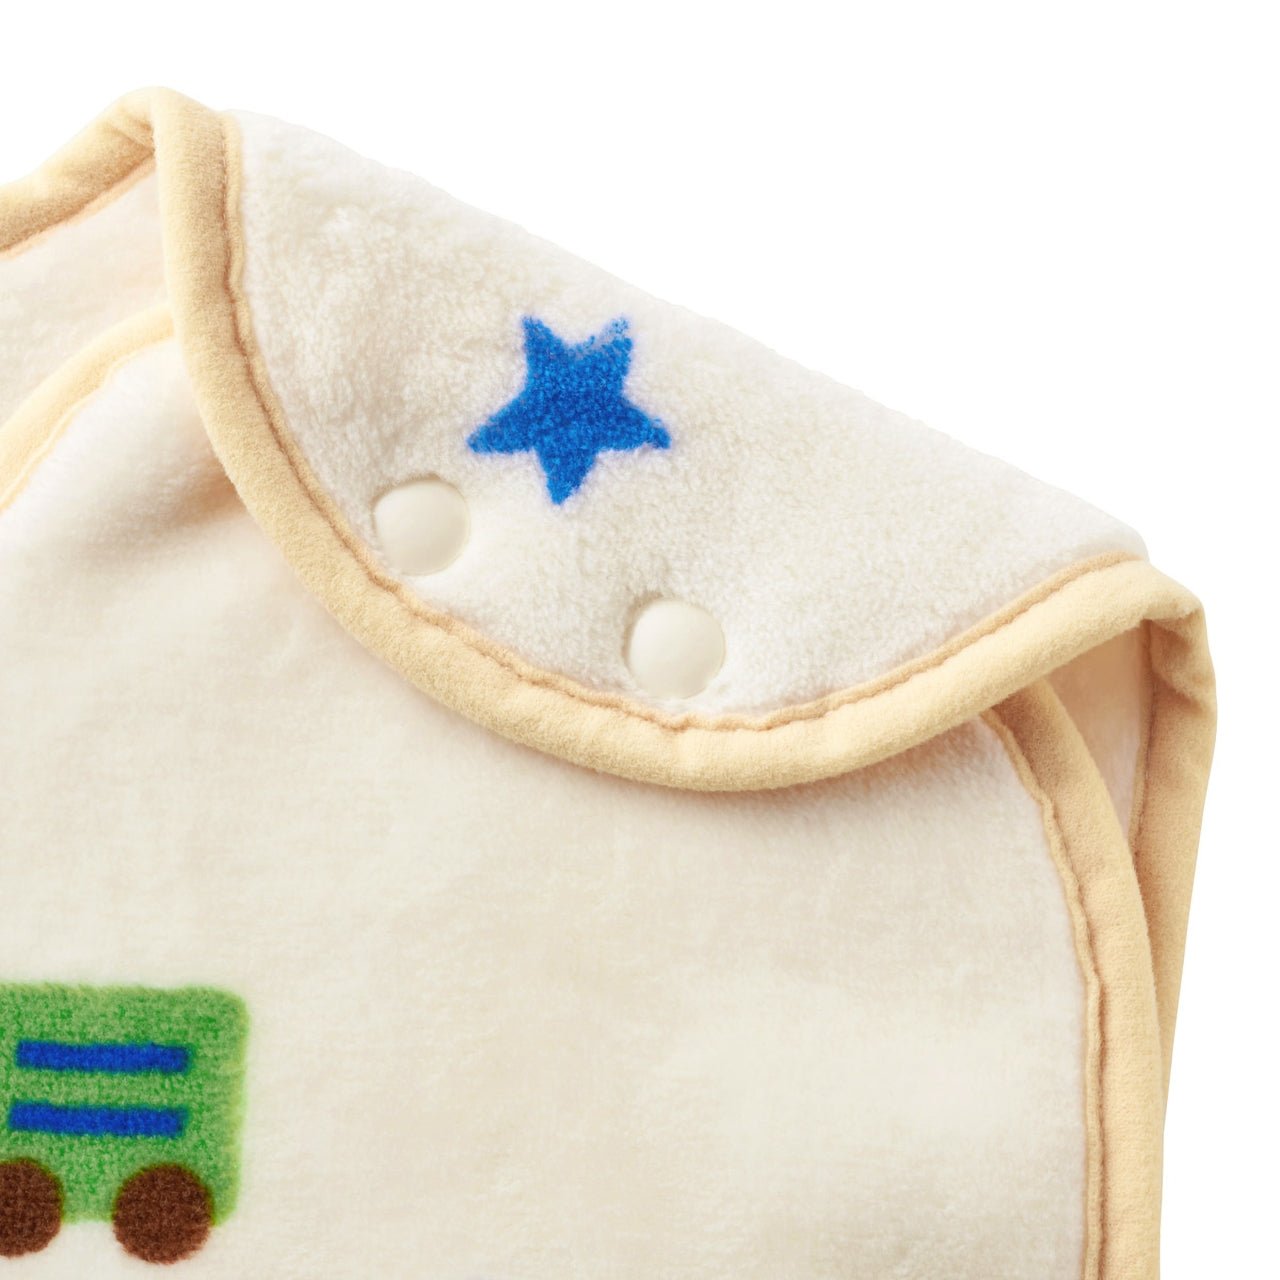 All Aboard to Dreamland Cotton Sleeping Blanket